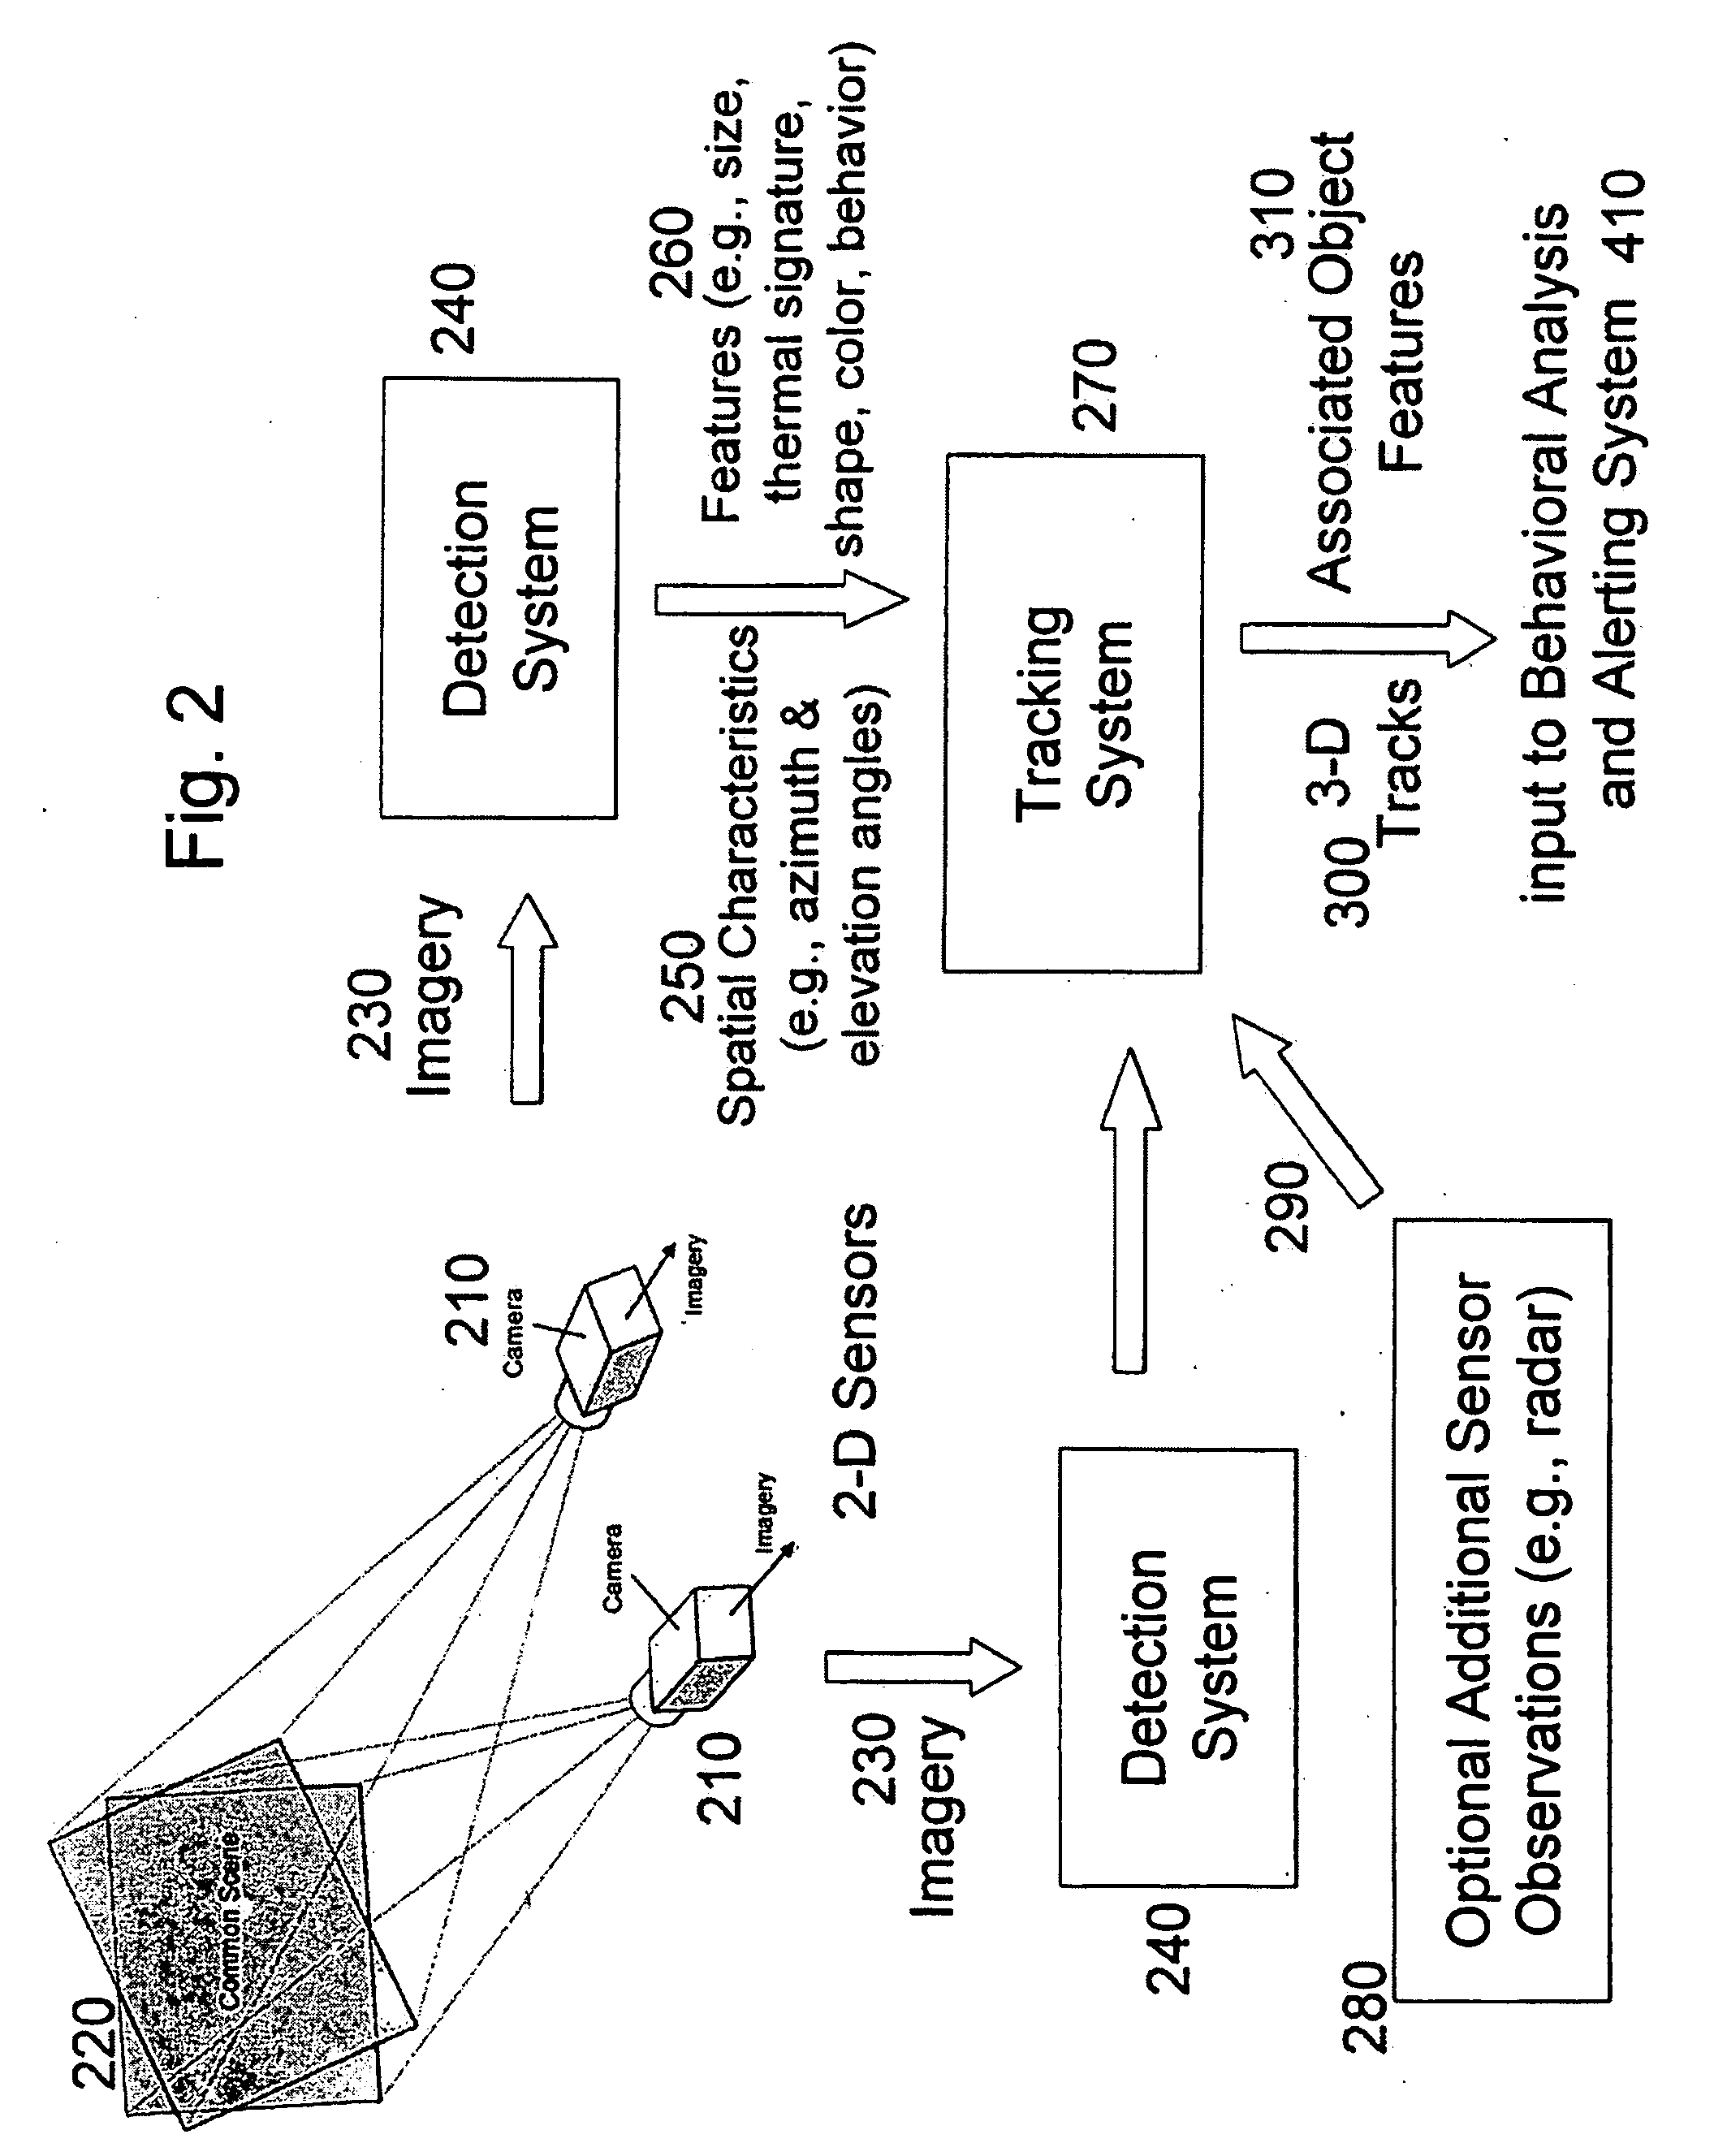 System and method for real-time 3-d object tracking and alerting via networked sensors